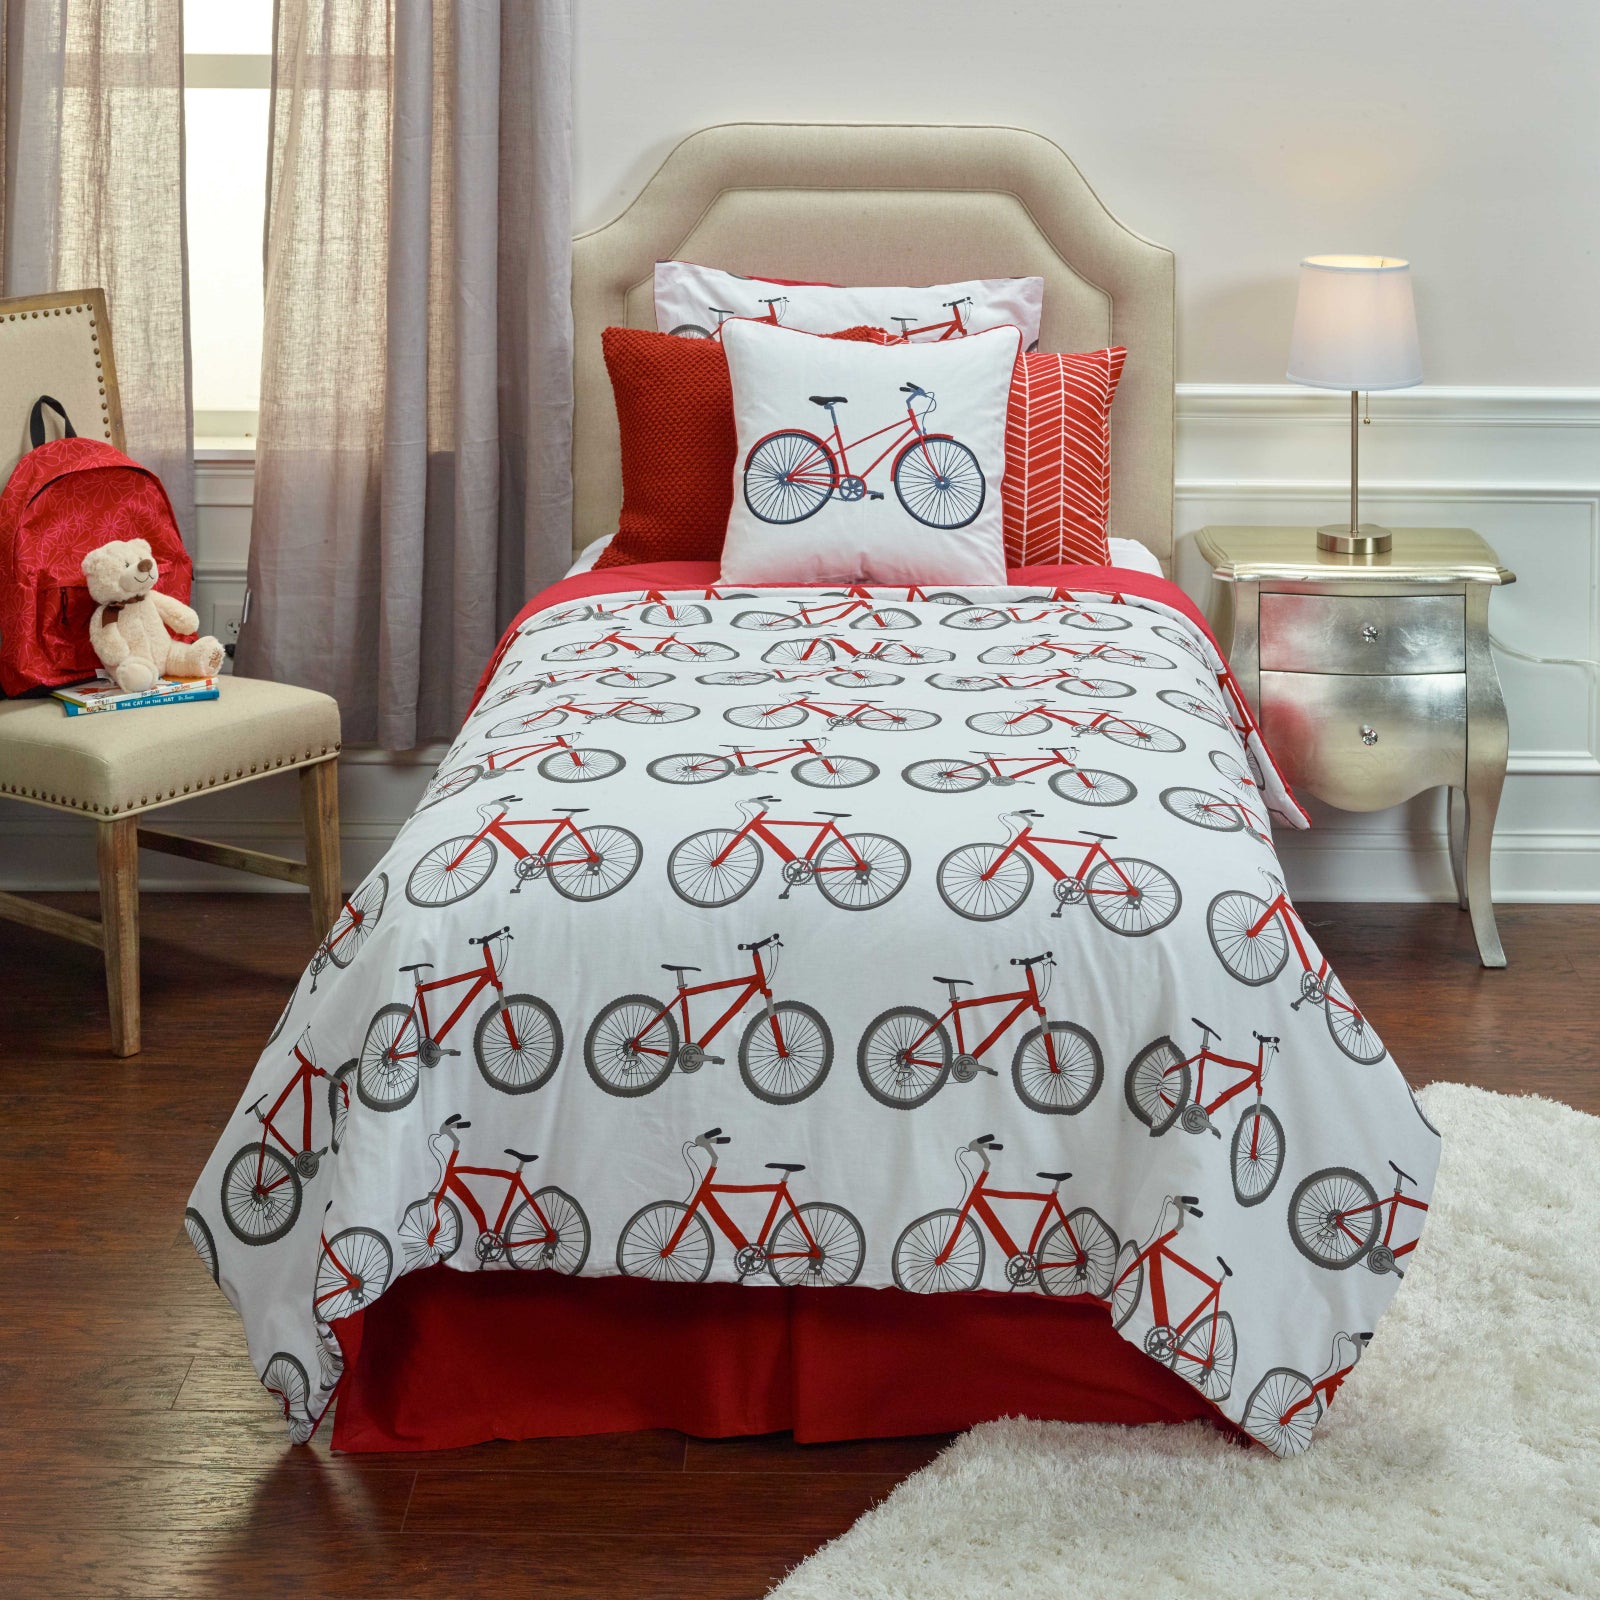 Rizzy BT1982 Bicycle Bed Red White Bedding main image